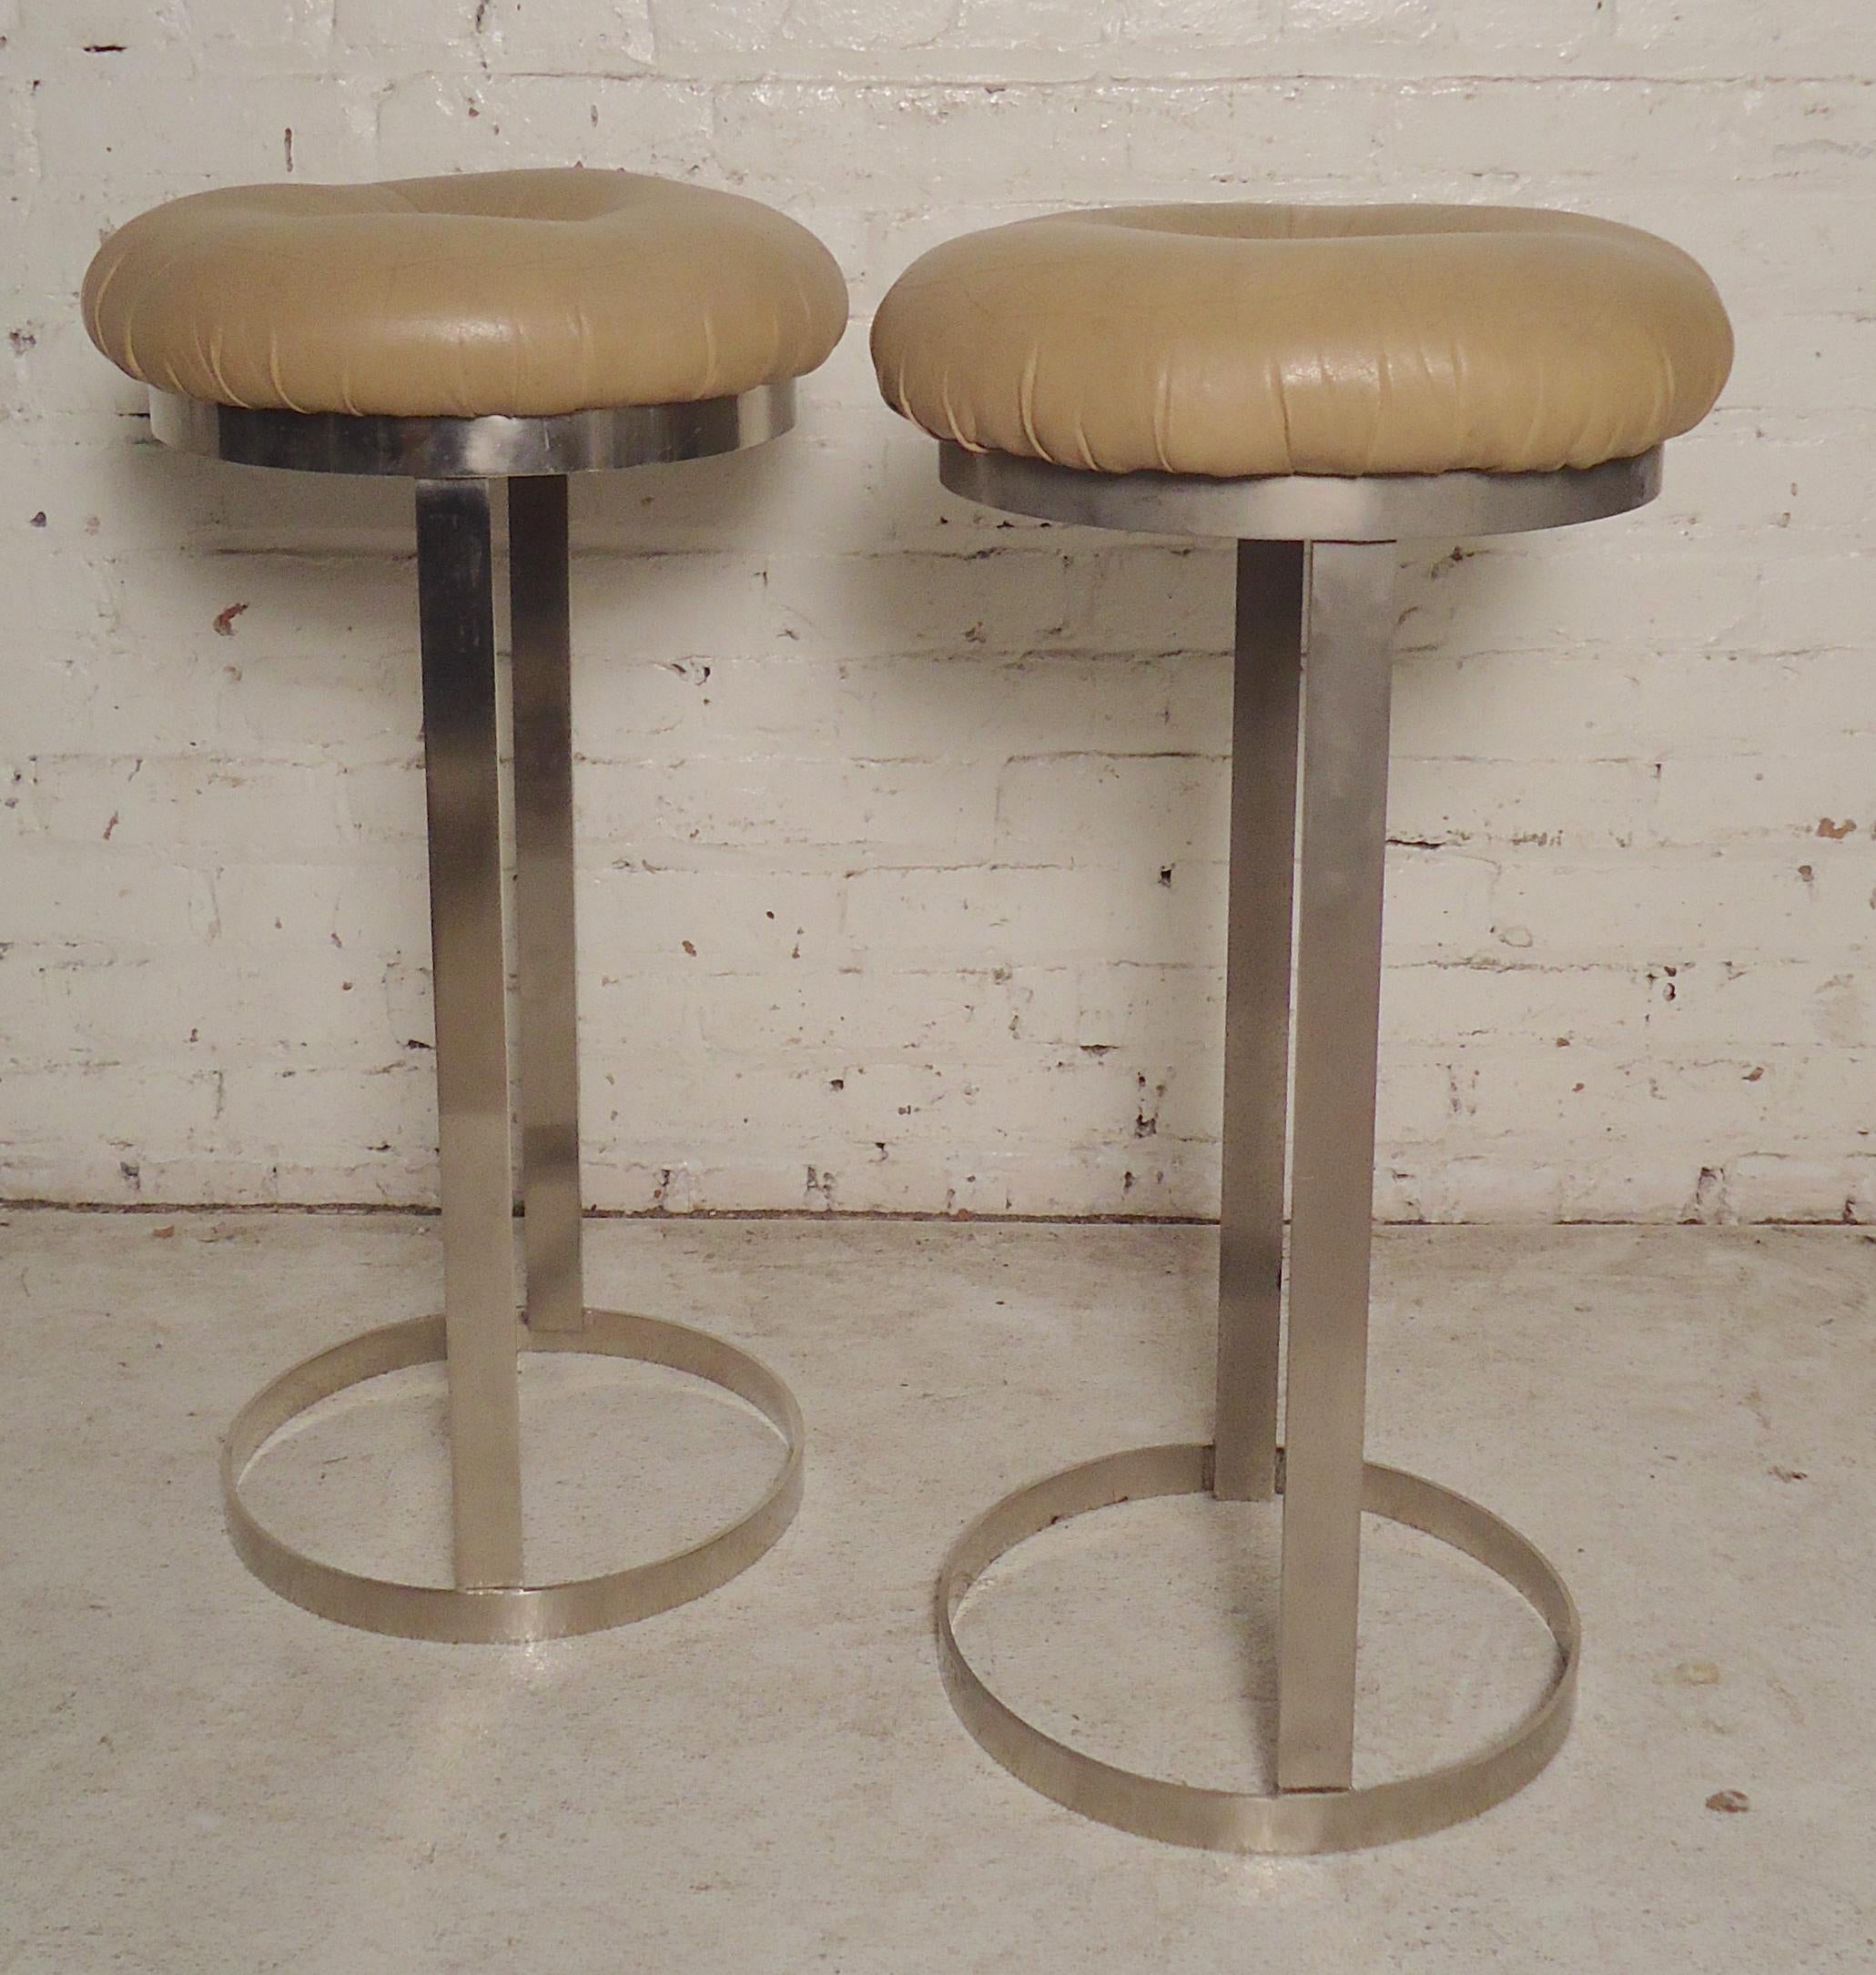 Vintage modern stools in the style of Milo Baughman with chrome bases and tufted seats.
(Please confirm item location - NY or NJ - with dealer).
   